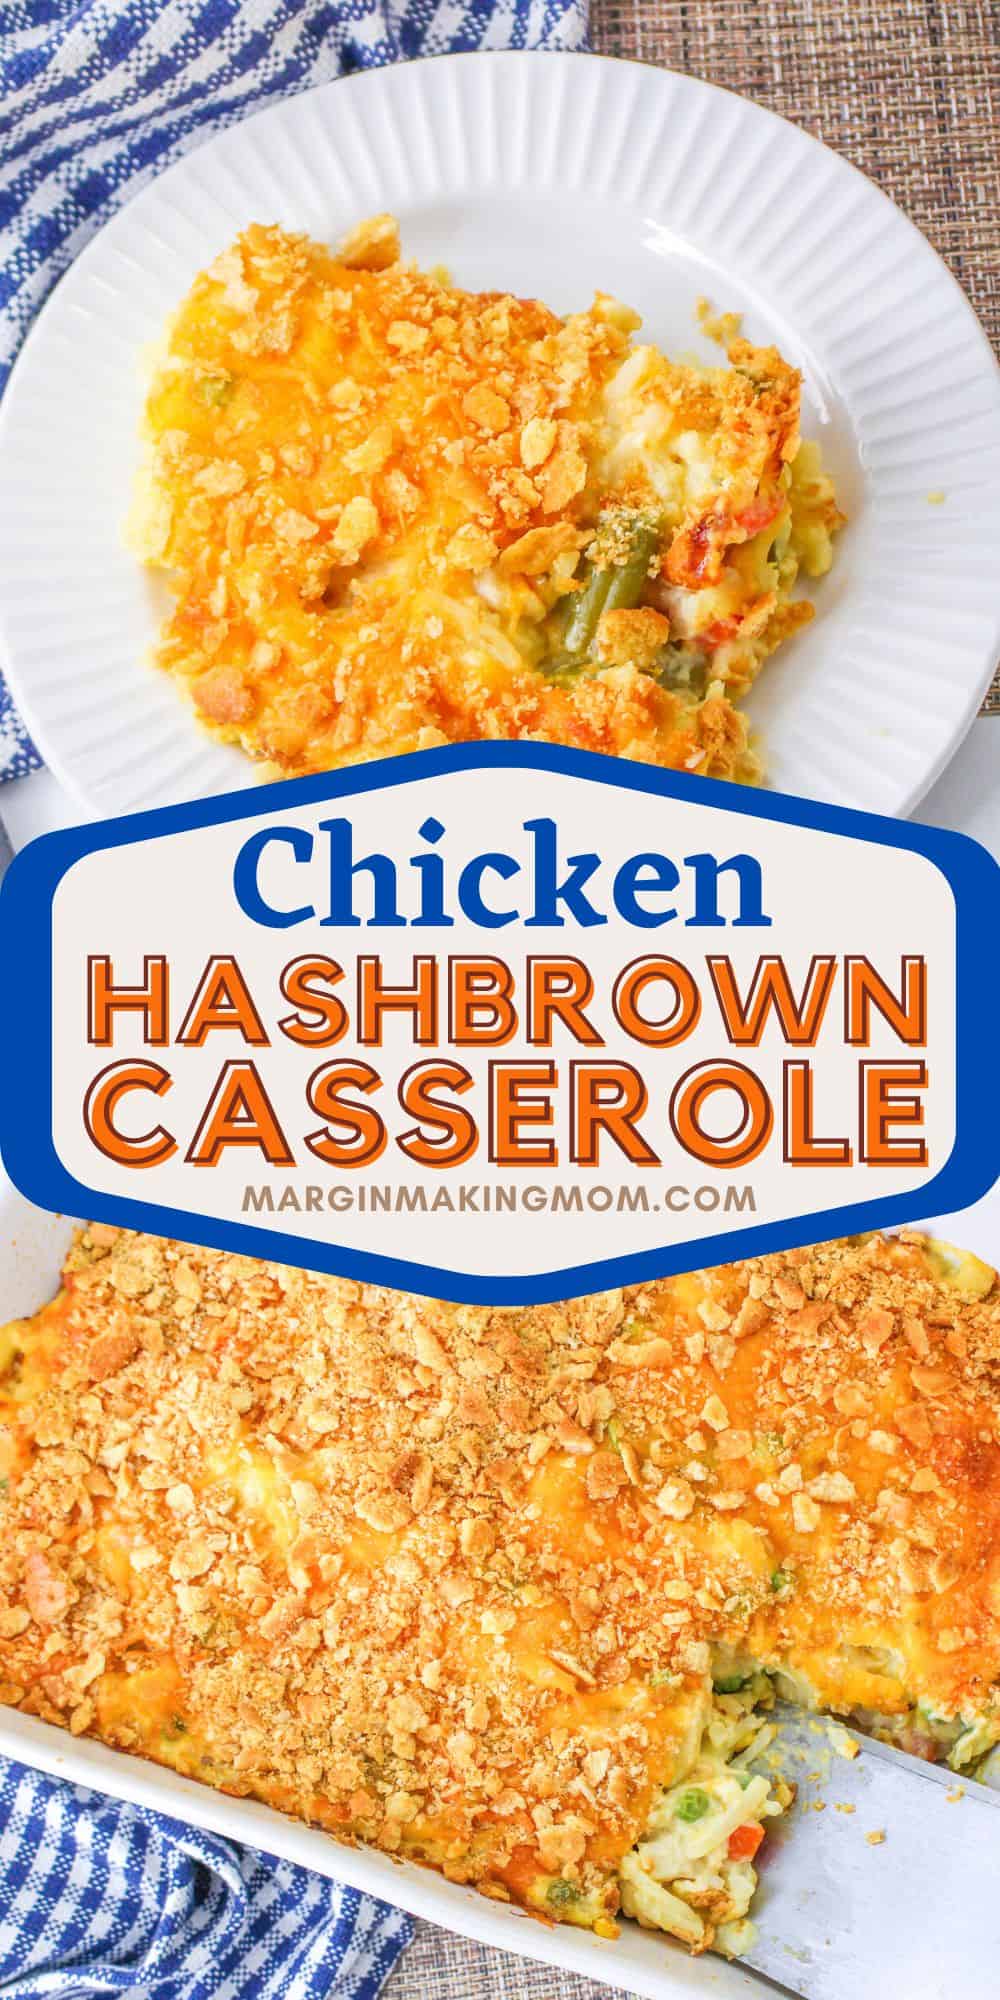 two photos; one shows the chicken hashbrown casserole in the pan, the other shows a serving on a white plate